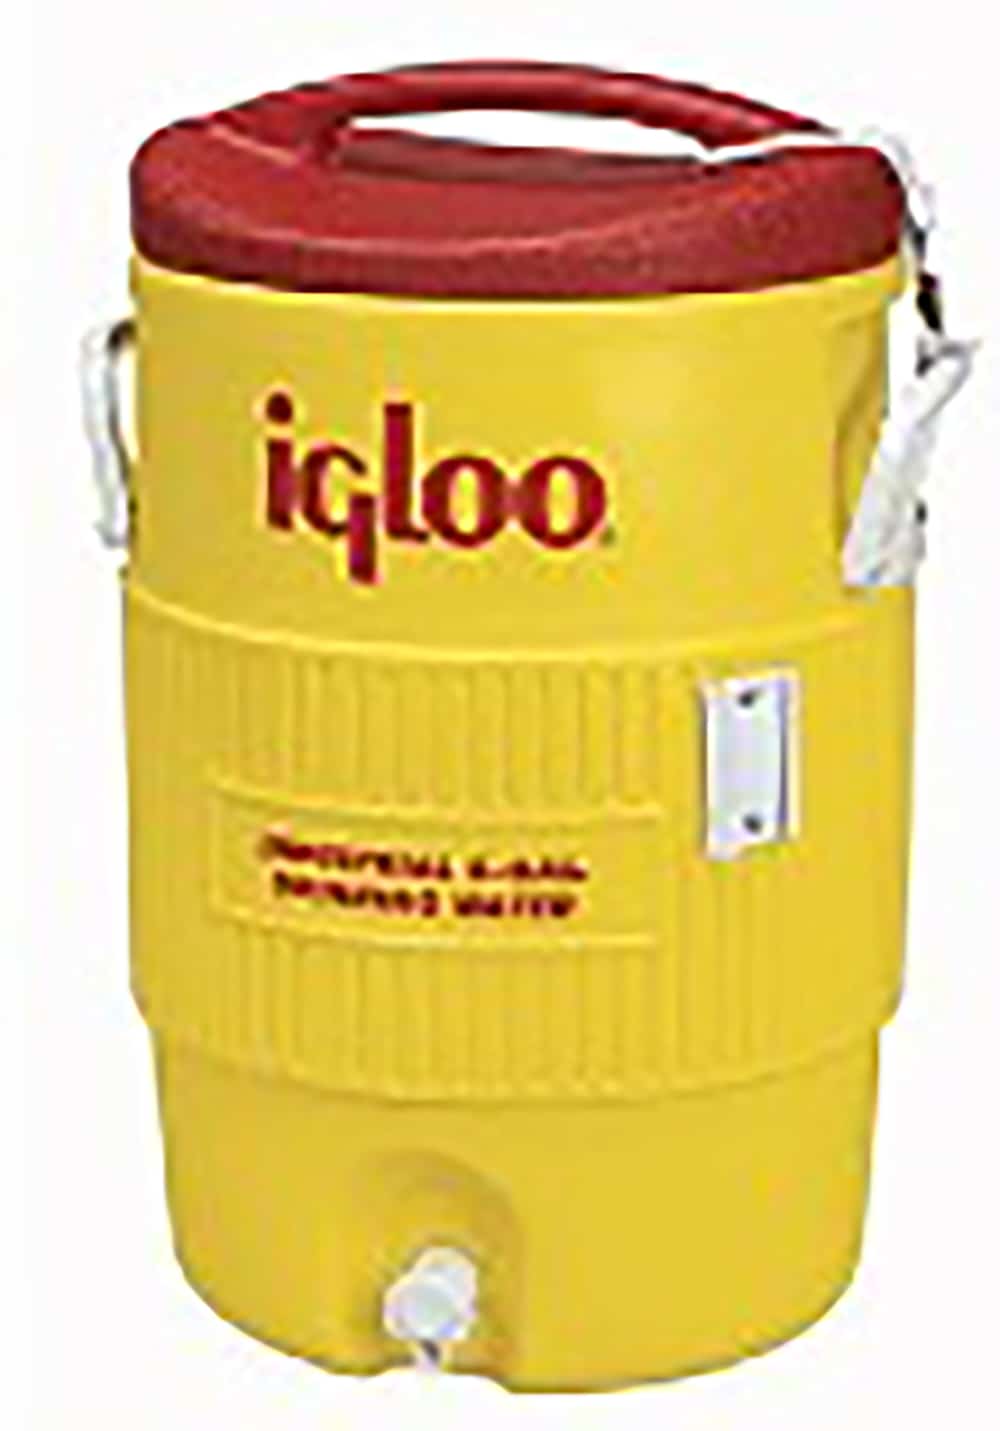 igloo container